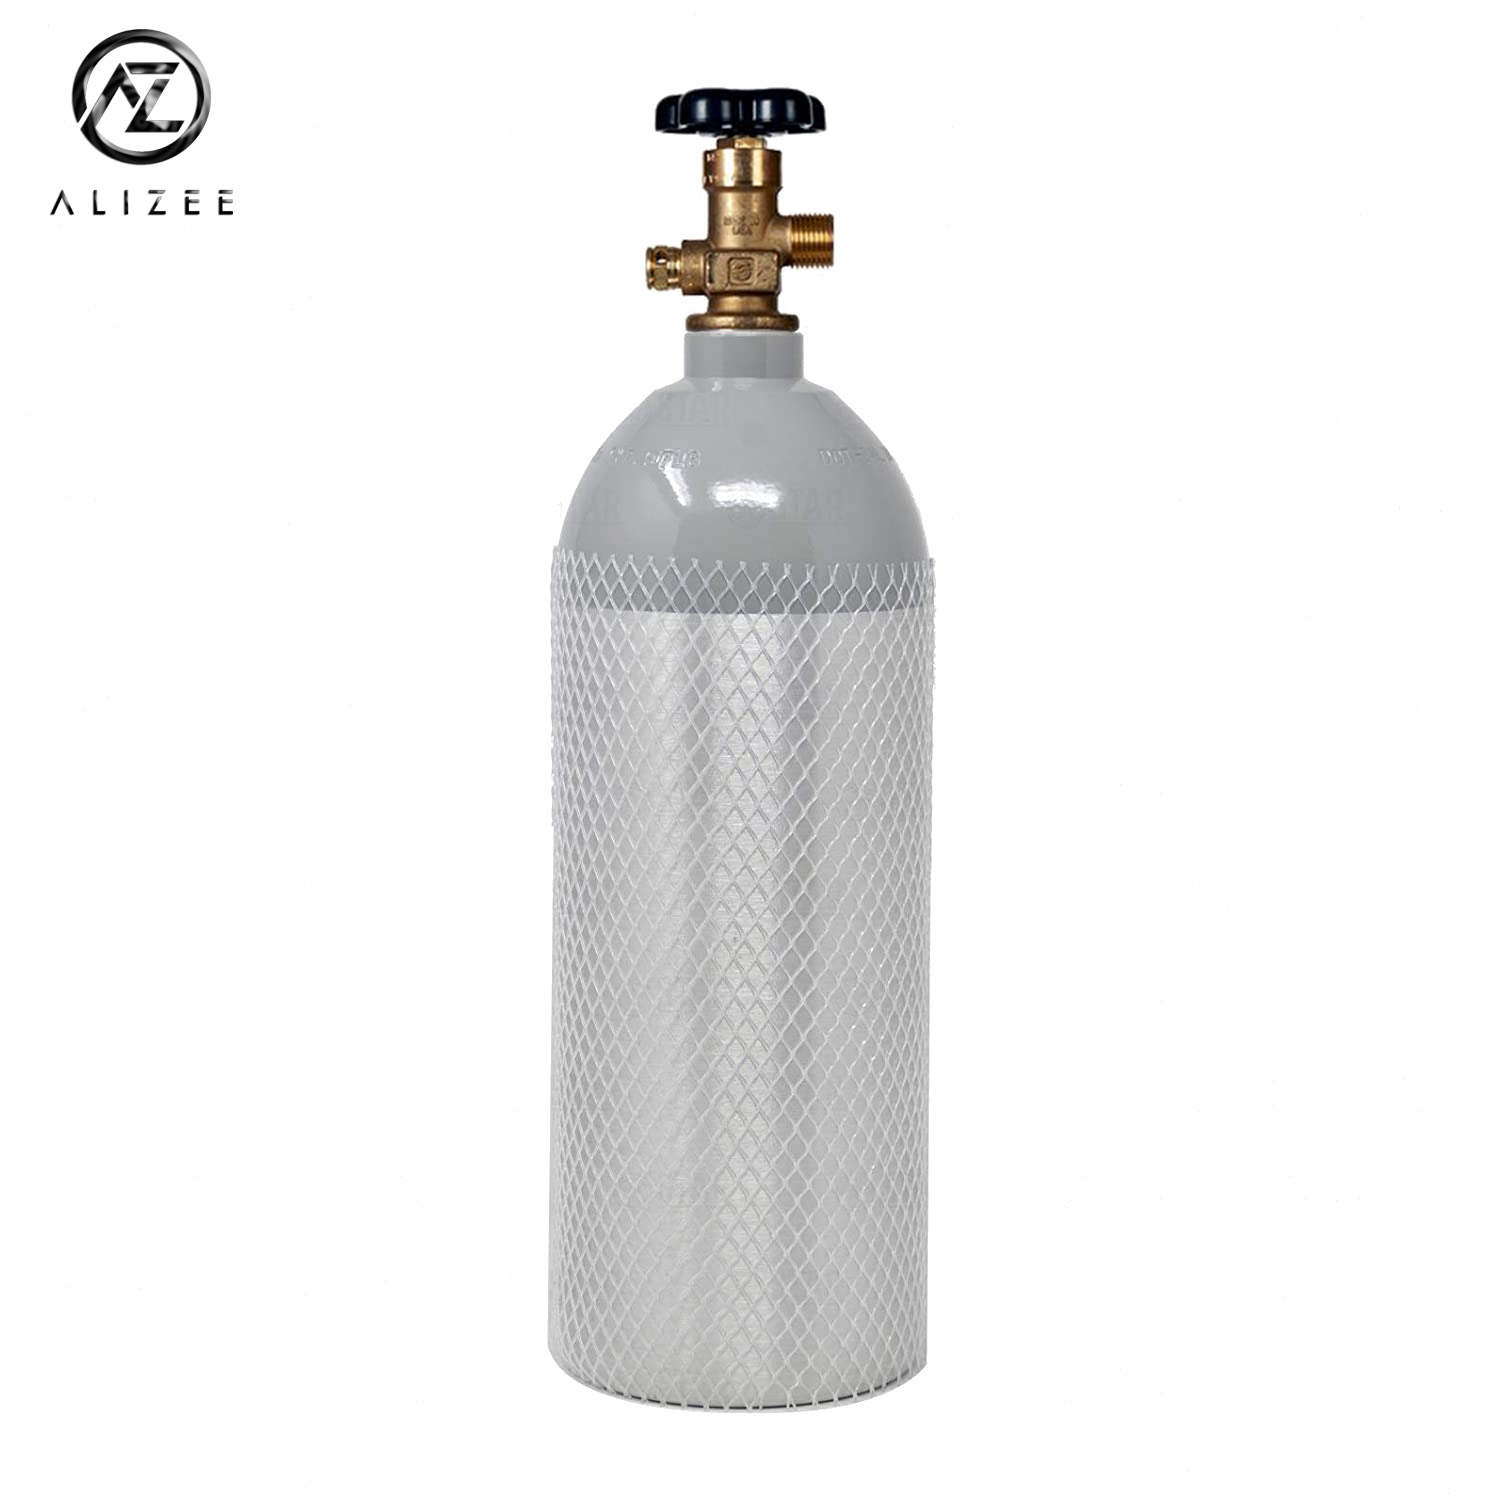 Aluminum 5lb CO2 Tank Cylinder For Beer Kegerator With Valve